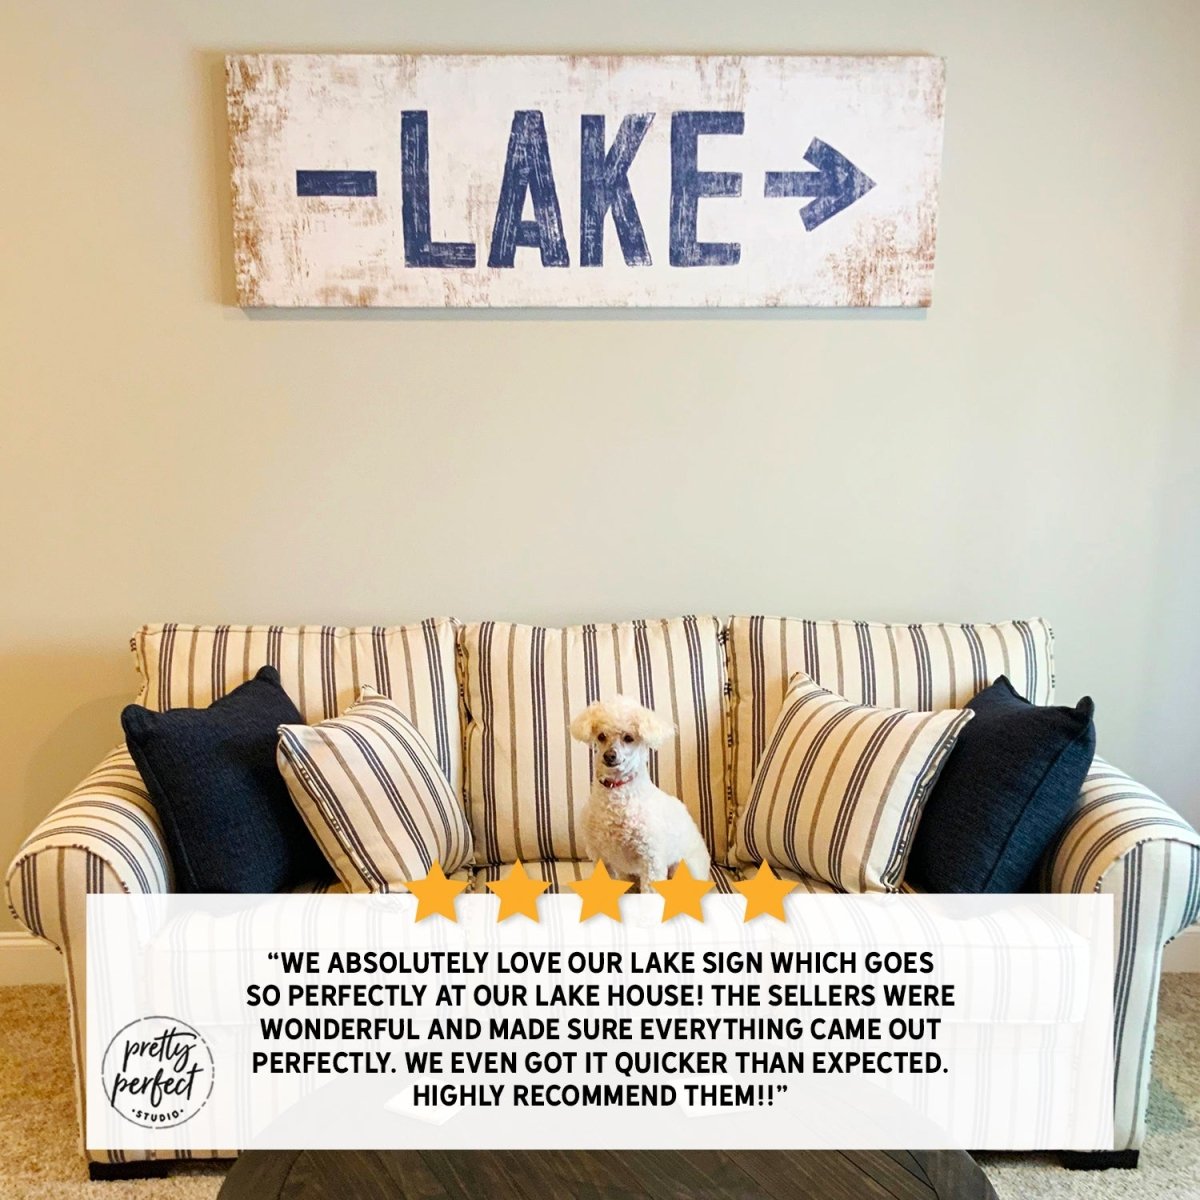 Customer product review for personalized lake arrow sign by Pretty Perfect Studio